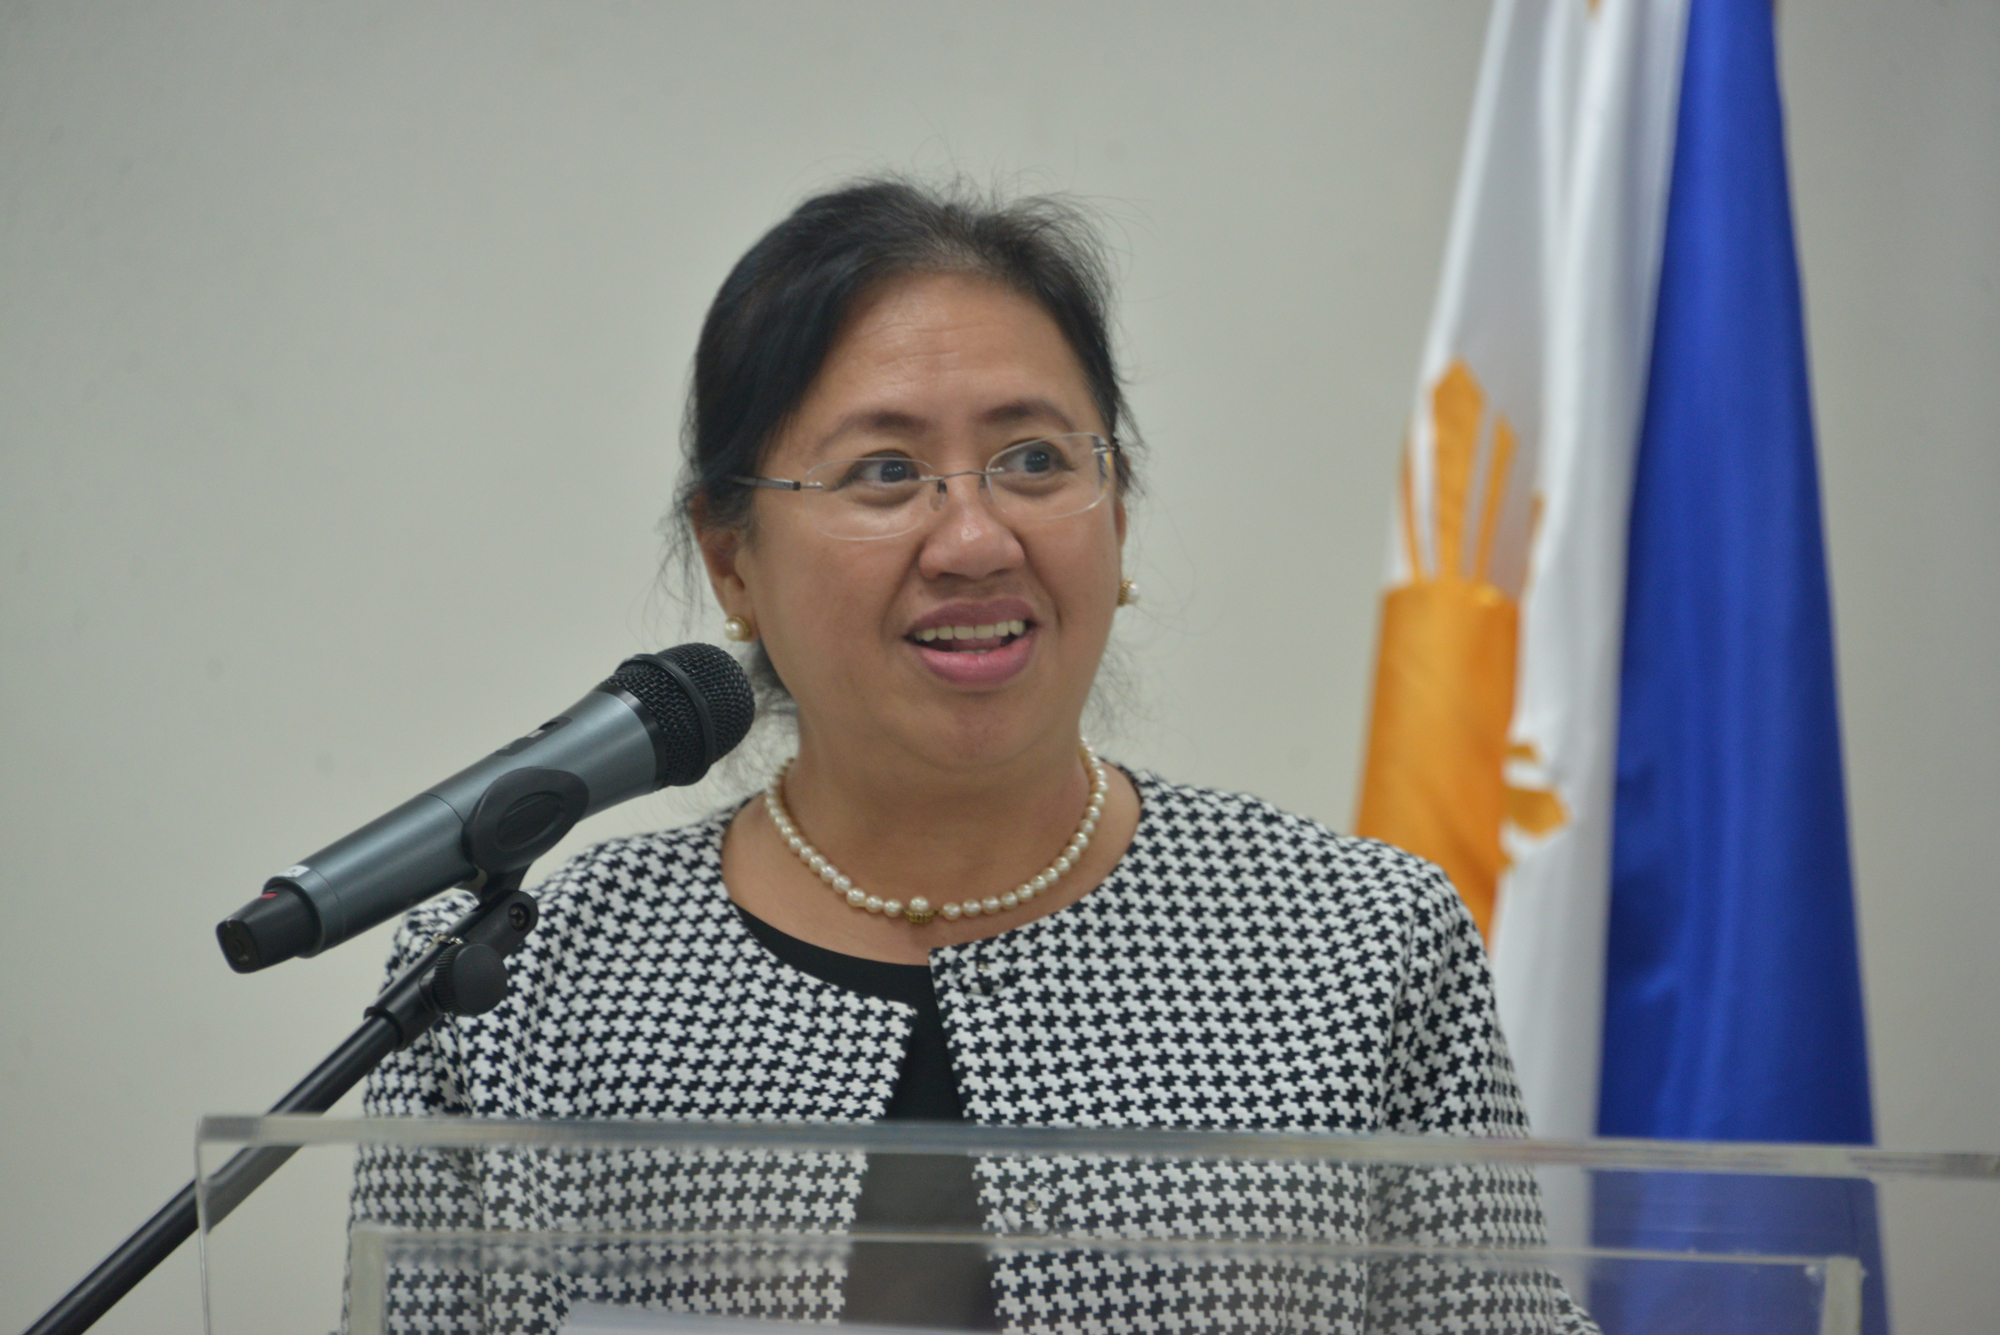 Public Seminar on Poverty and Child Stunting-pids-poverty-2-20190725.jpg